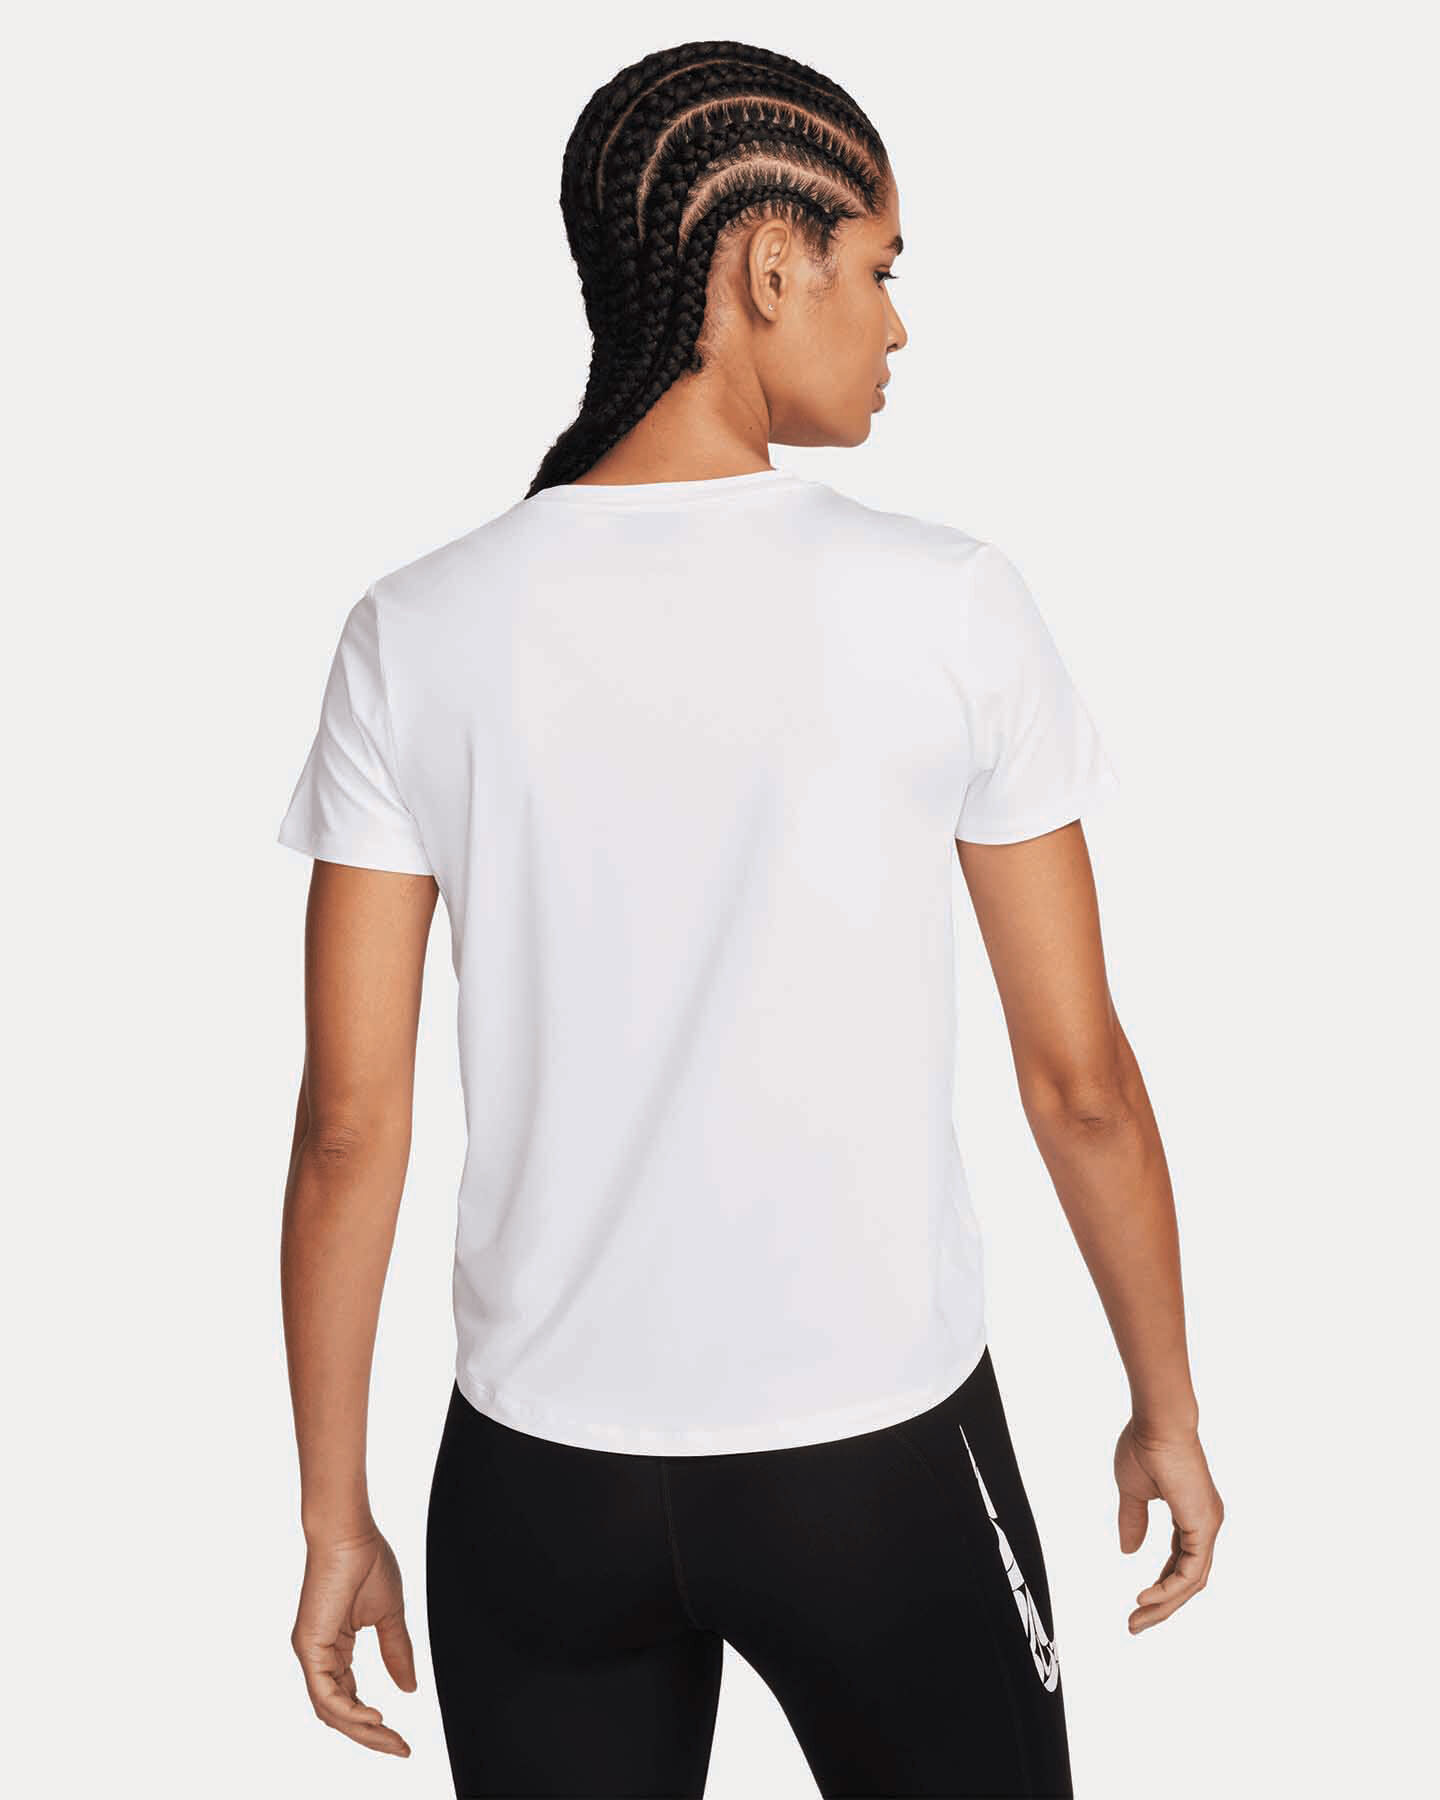  T-Shirt running NIKE ONE SWOOSH W S5644525|100|L scatto 1